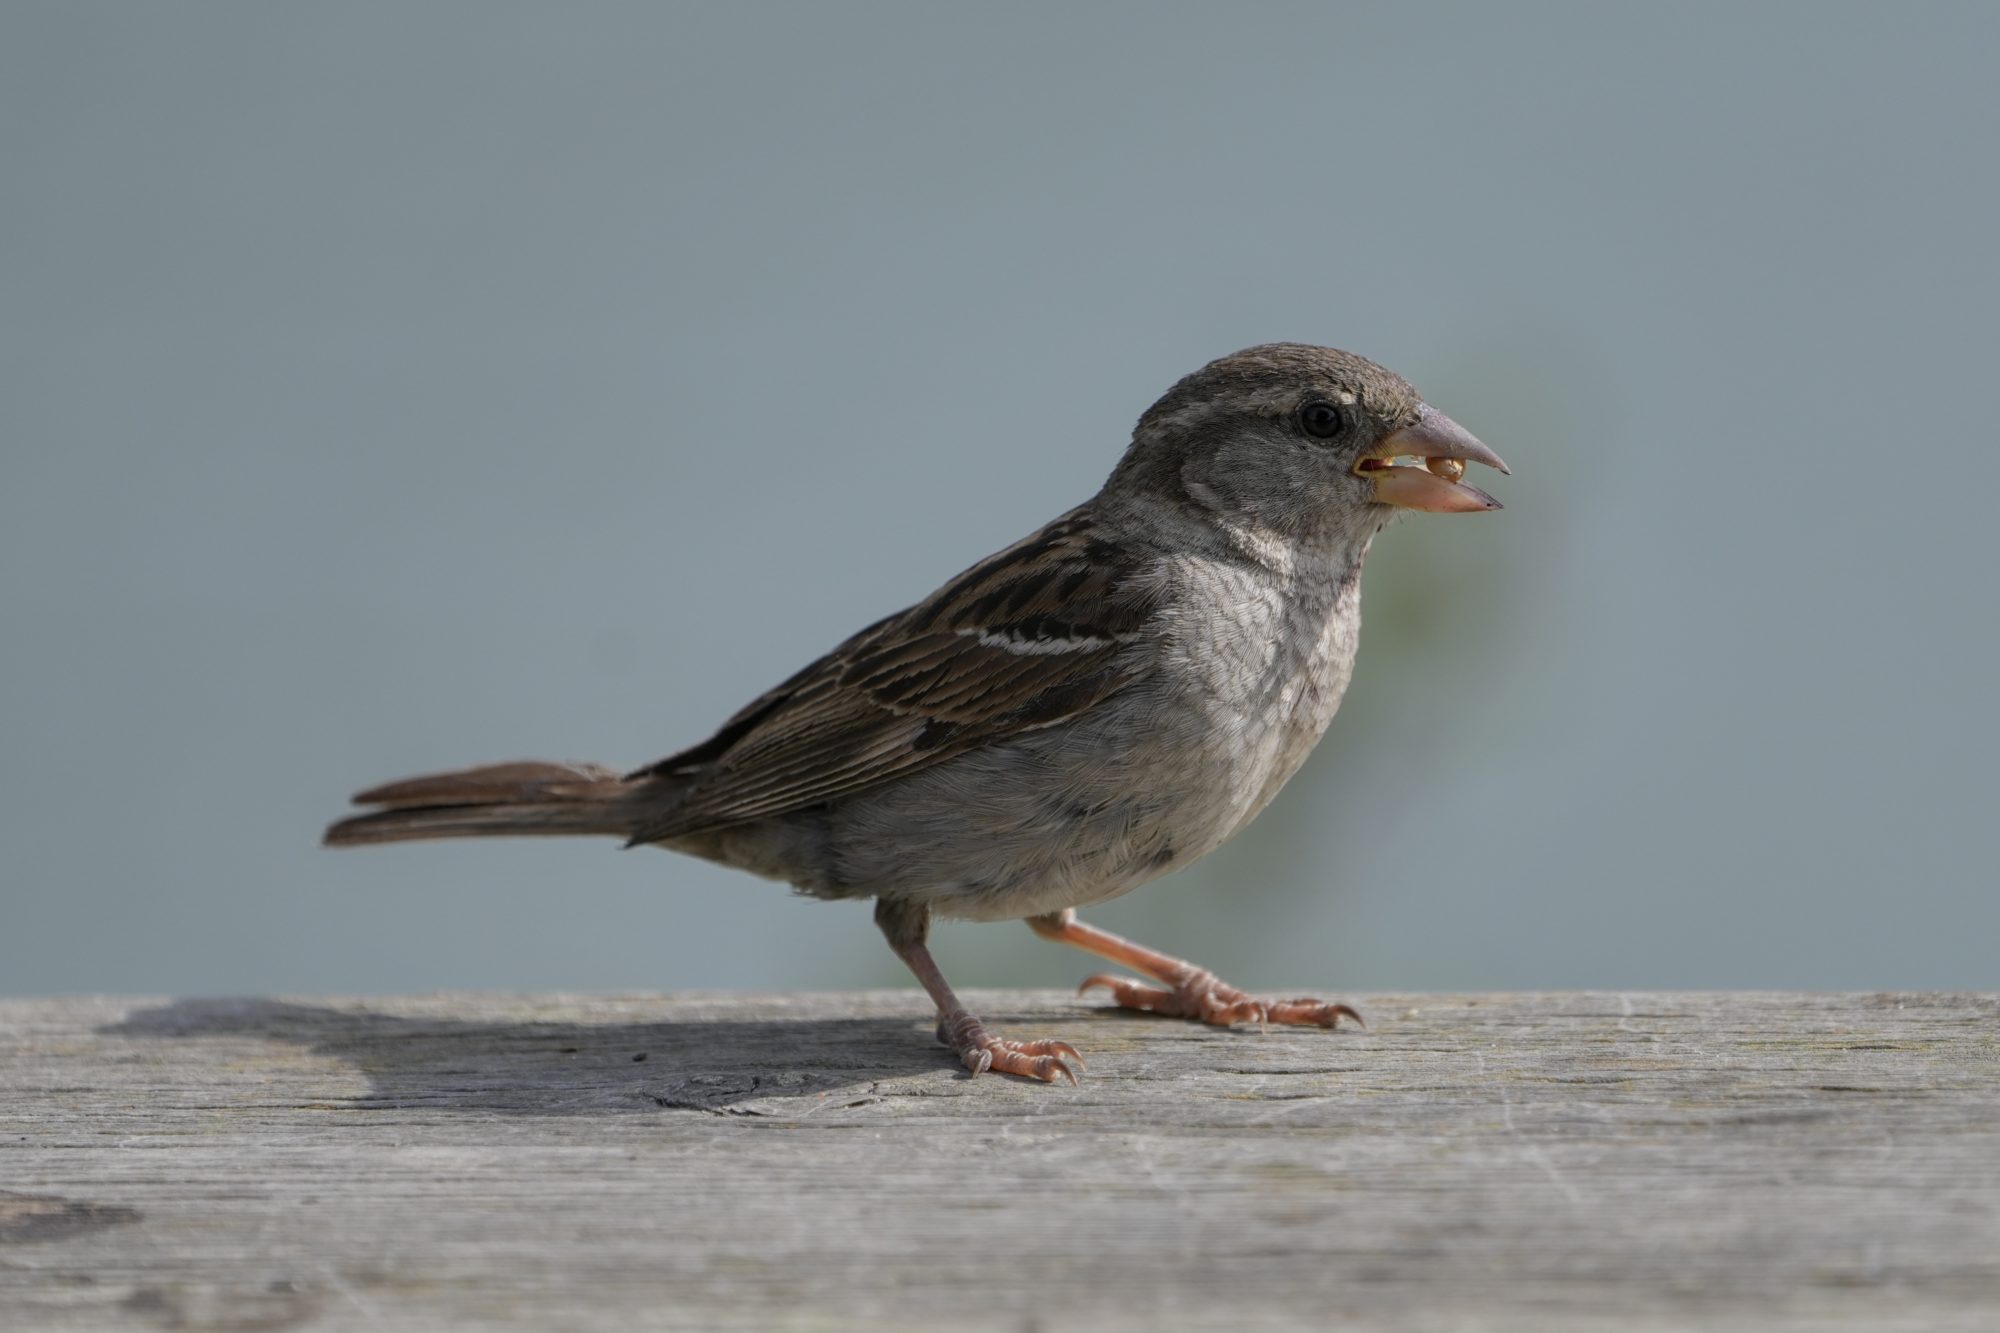 A female House Sparrow on a wooden fence, holding a small seed in its beak